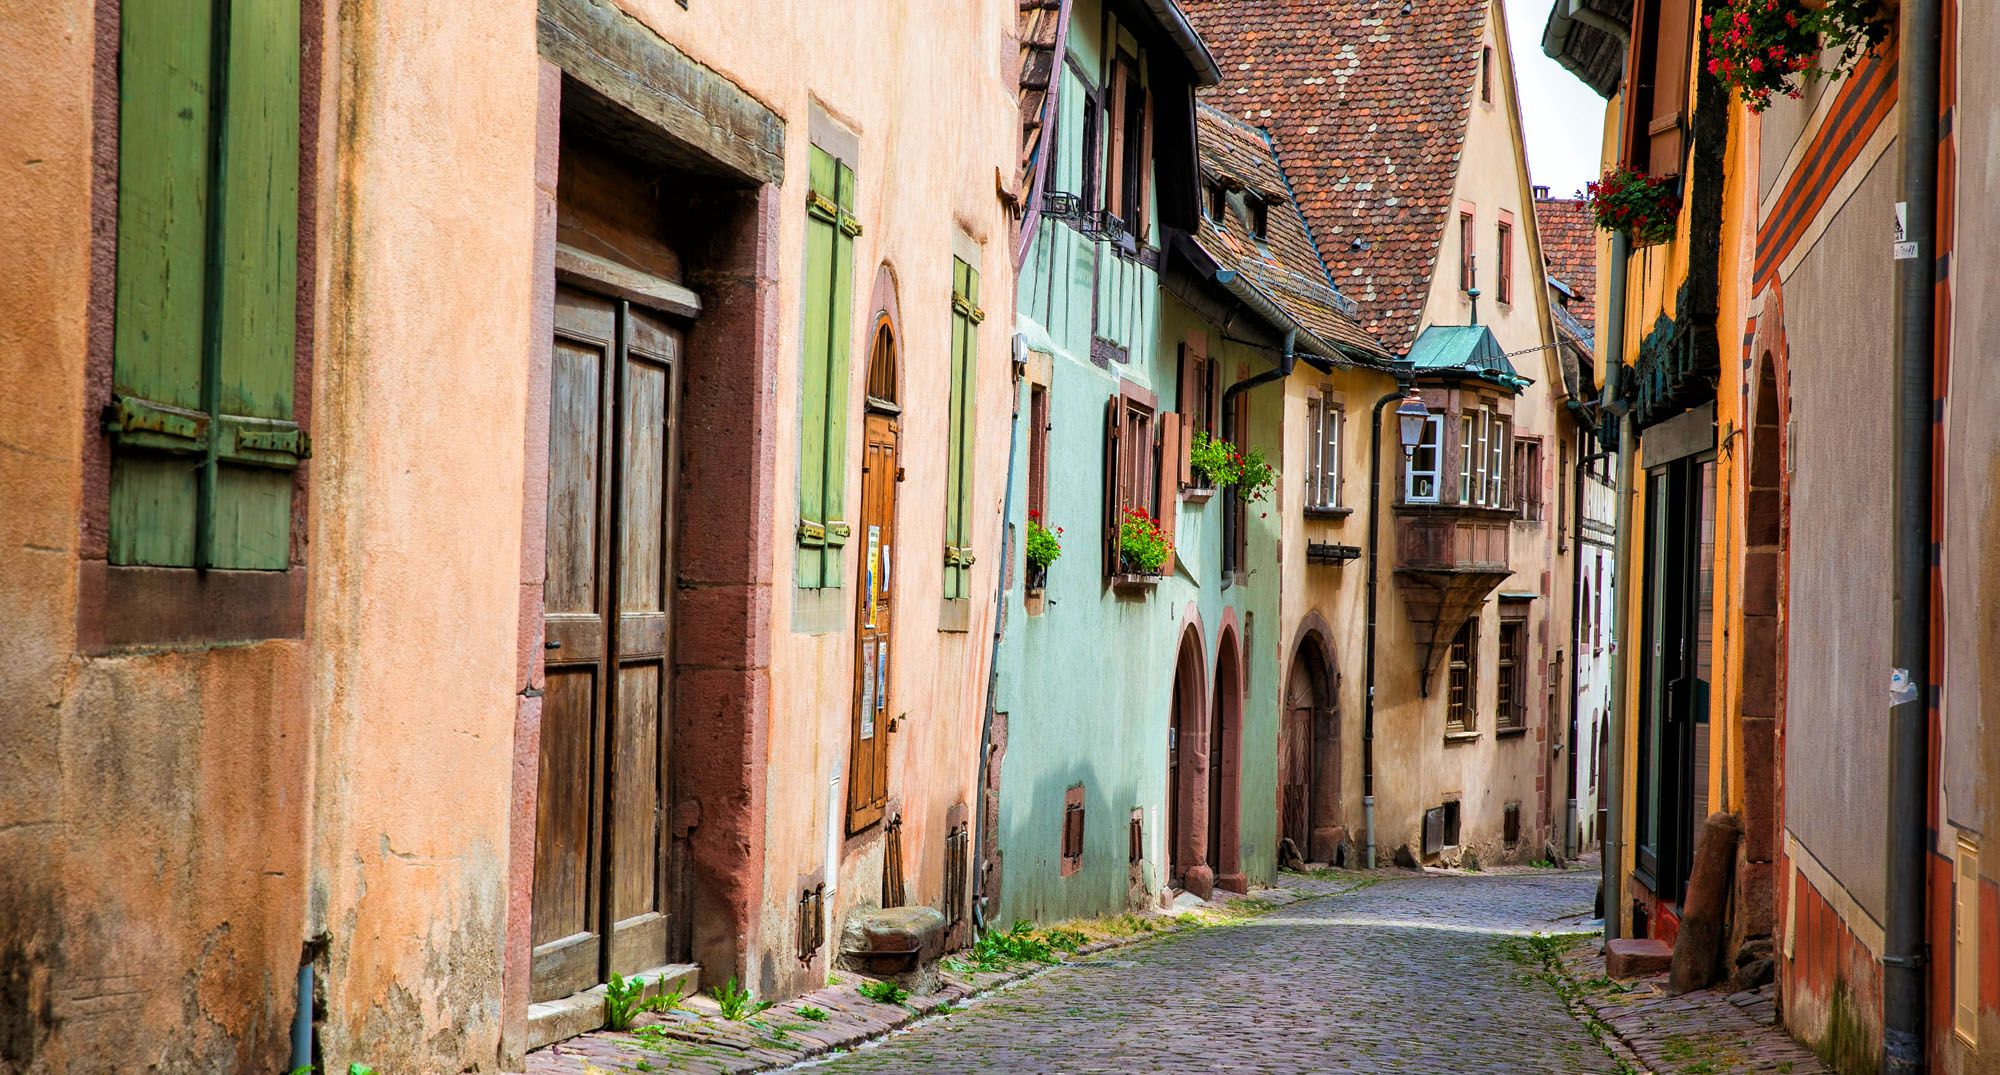 Featured image for “10 Fairytale Towns to Visit on the Alsace Wine Route”